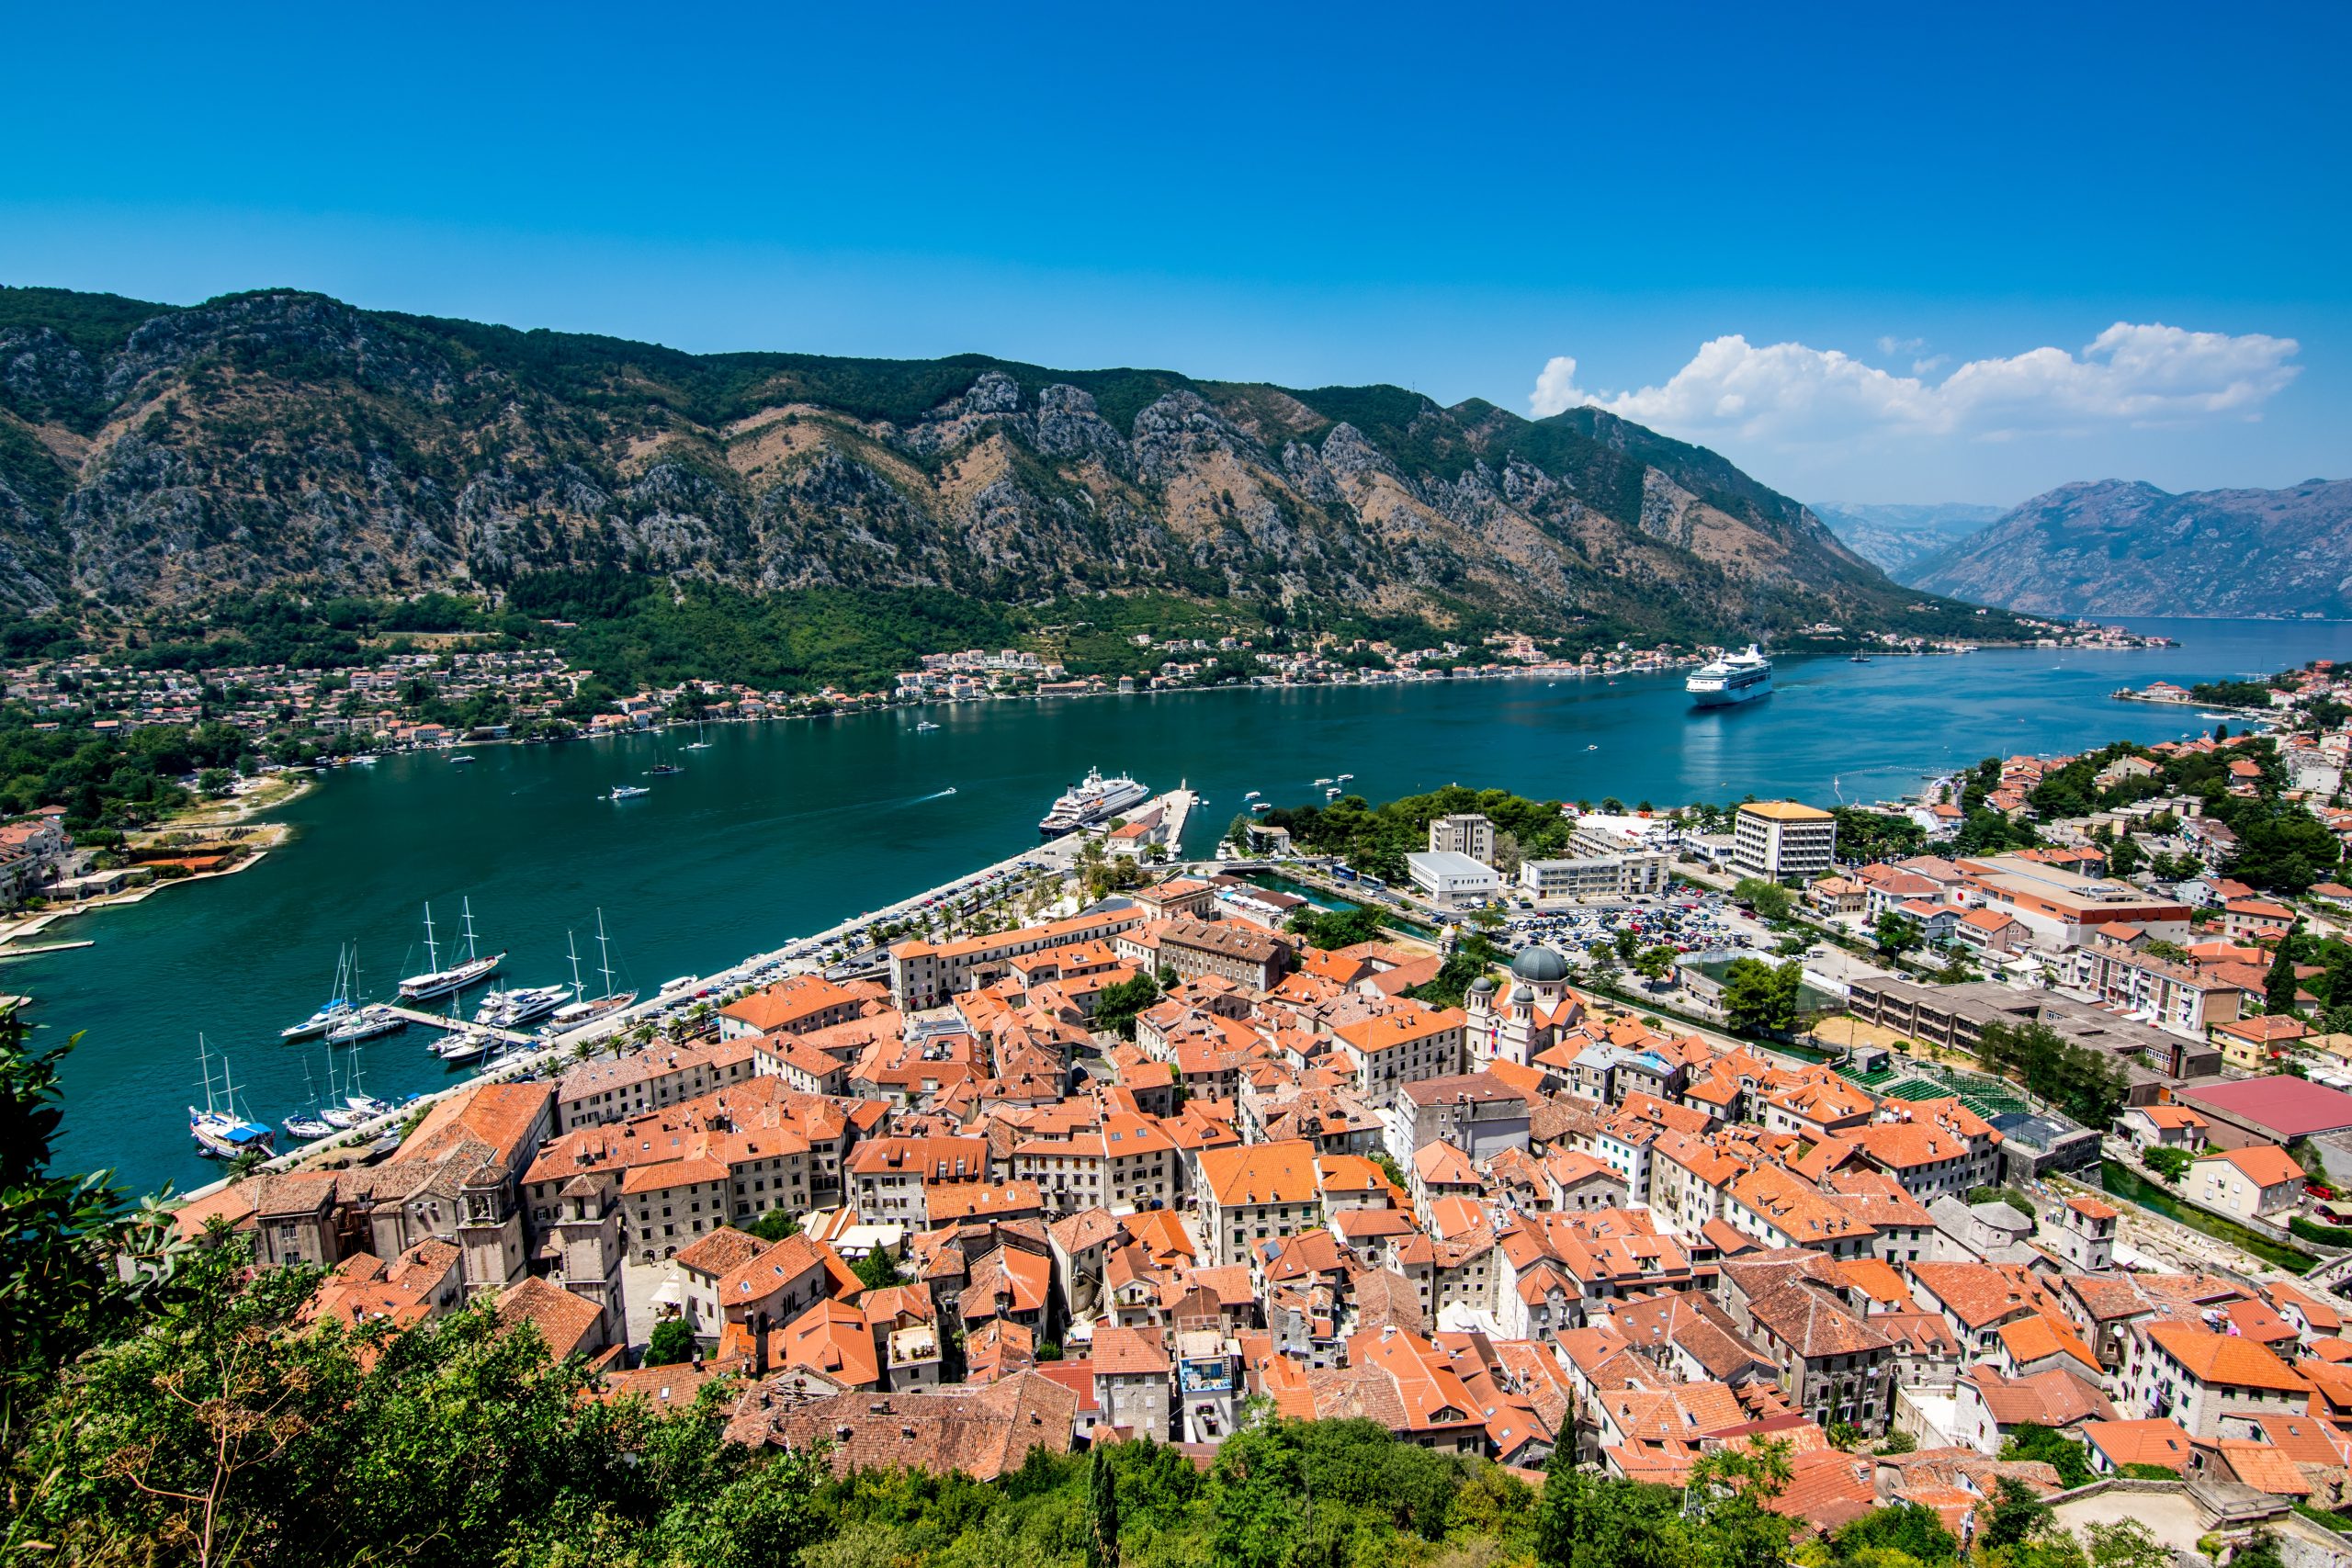 An aerial view of Kotor, Montenegro overlooking the houses, mountains and sea.